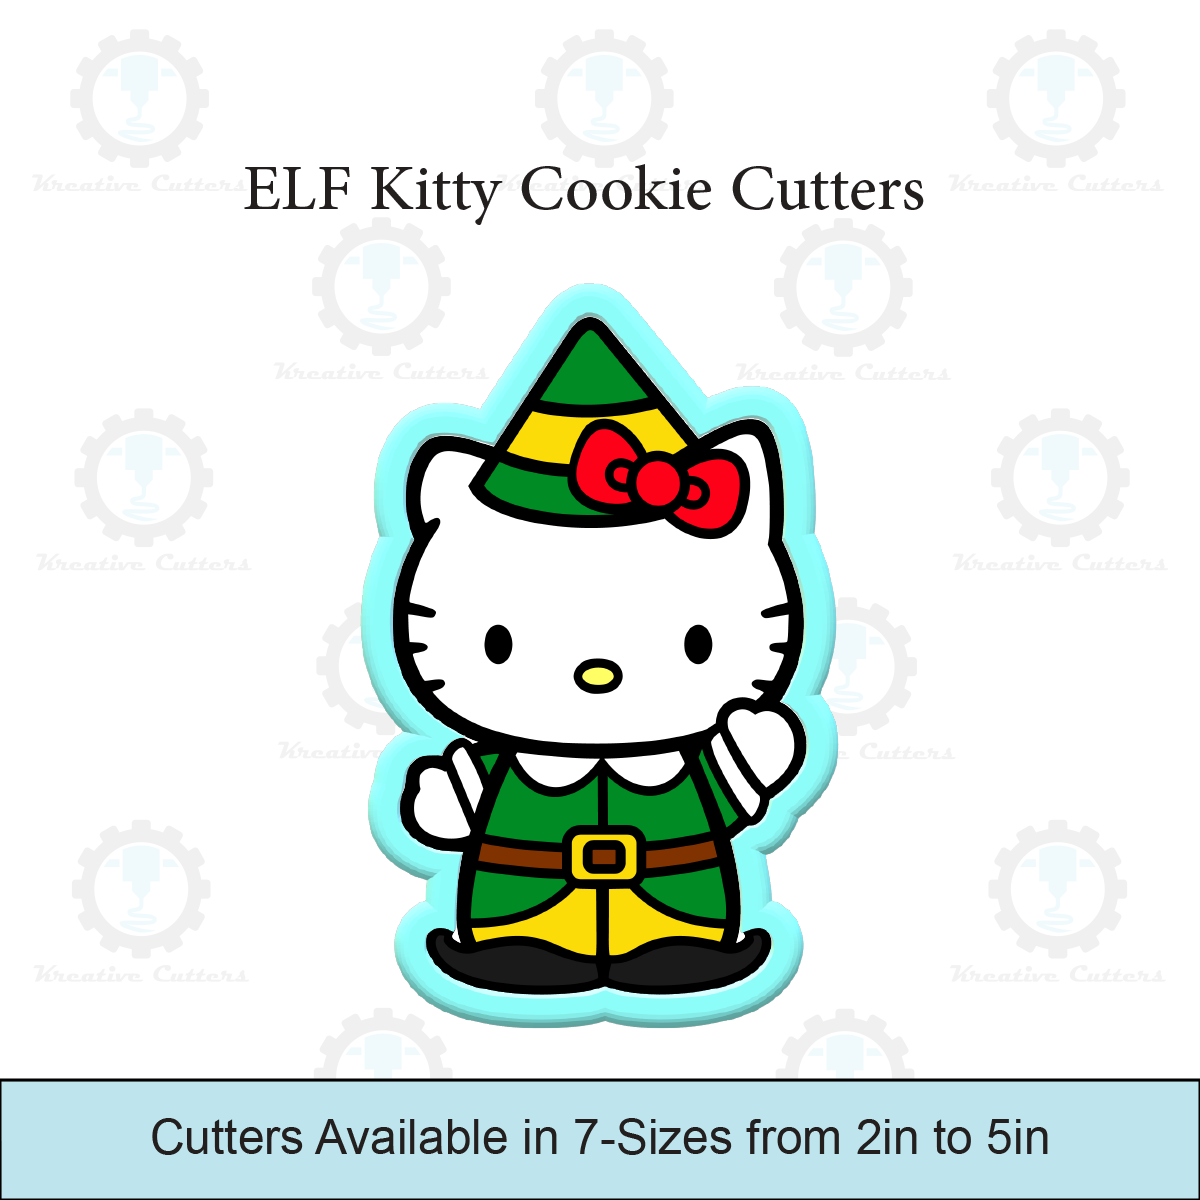 Elf Kitty Cookie Cutters